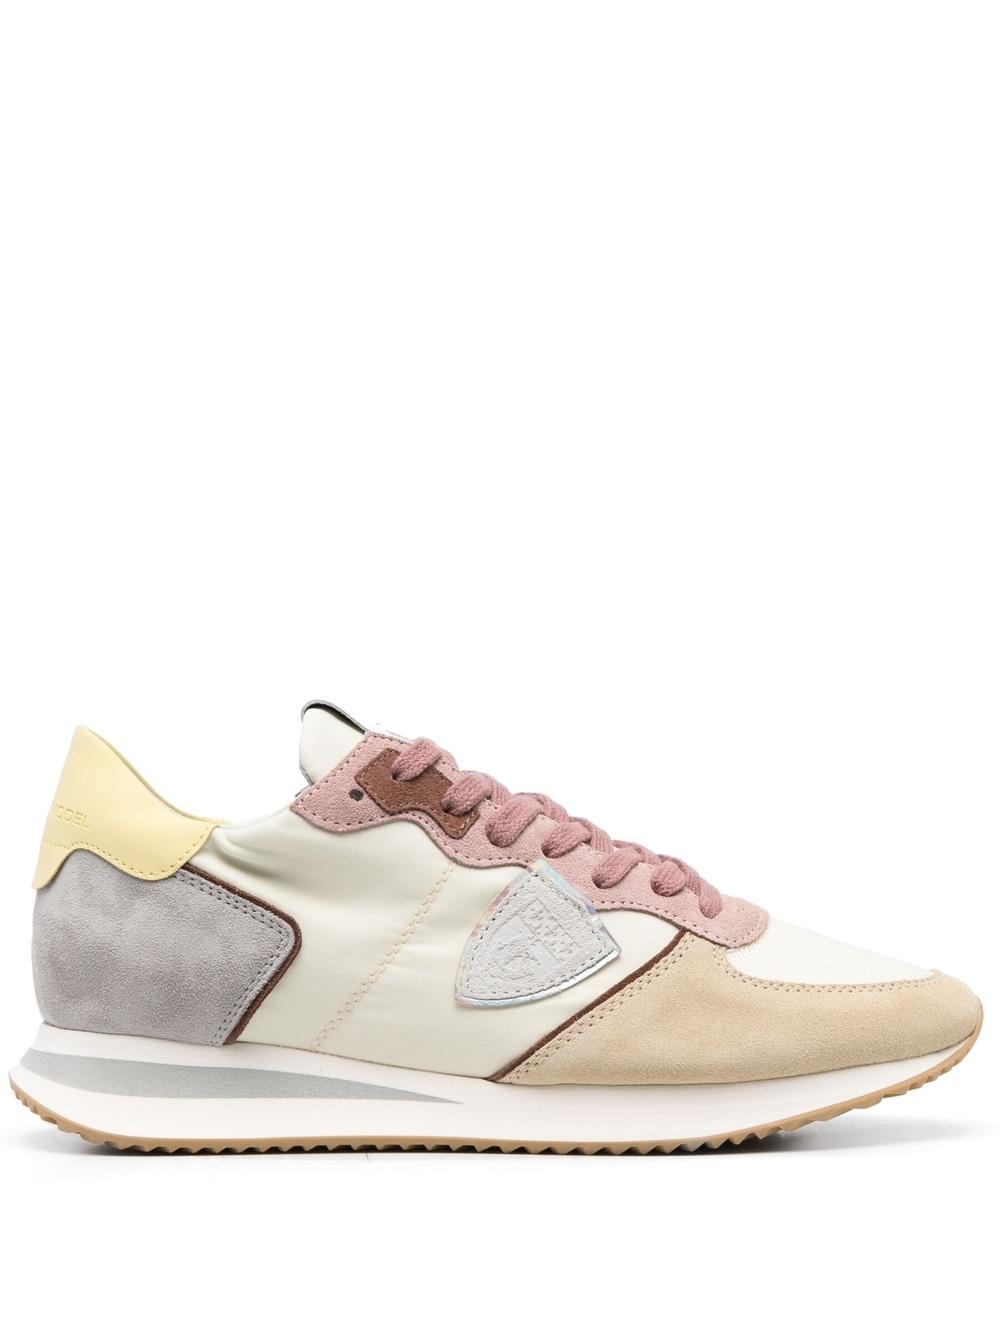 Philippe Model Paris Tropez Low-top Leather Sneakers in Pink | Lyst